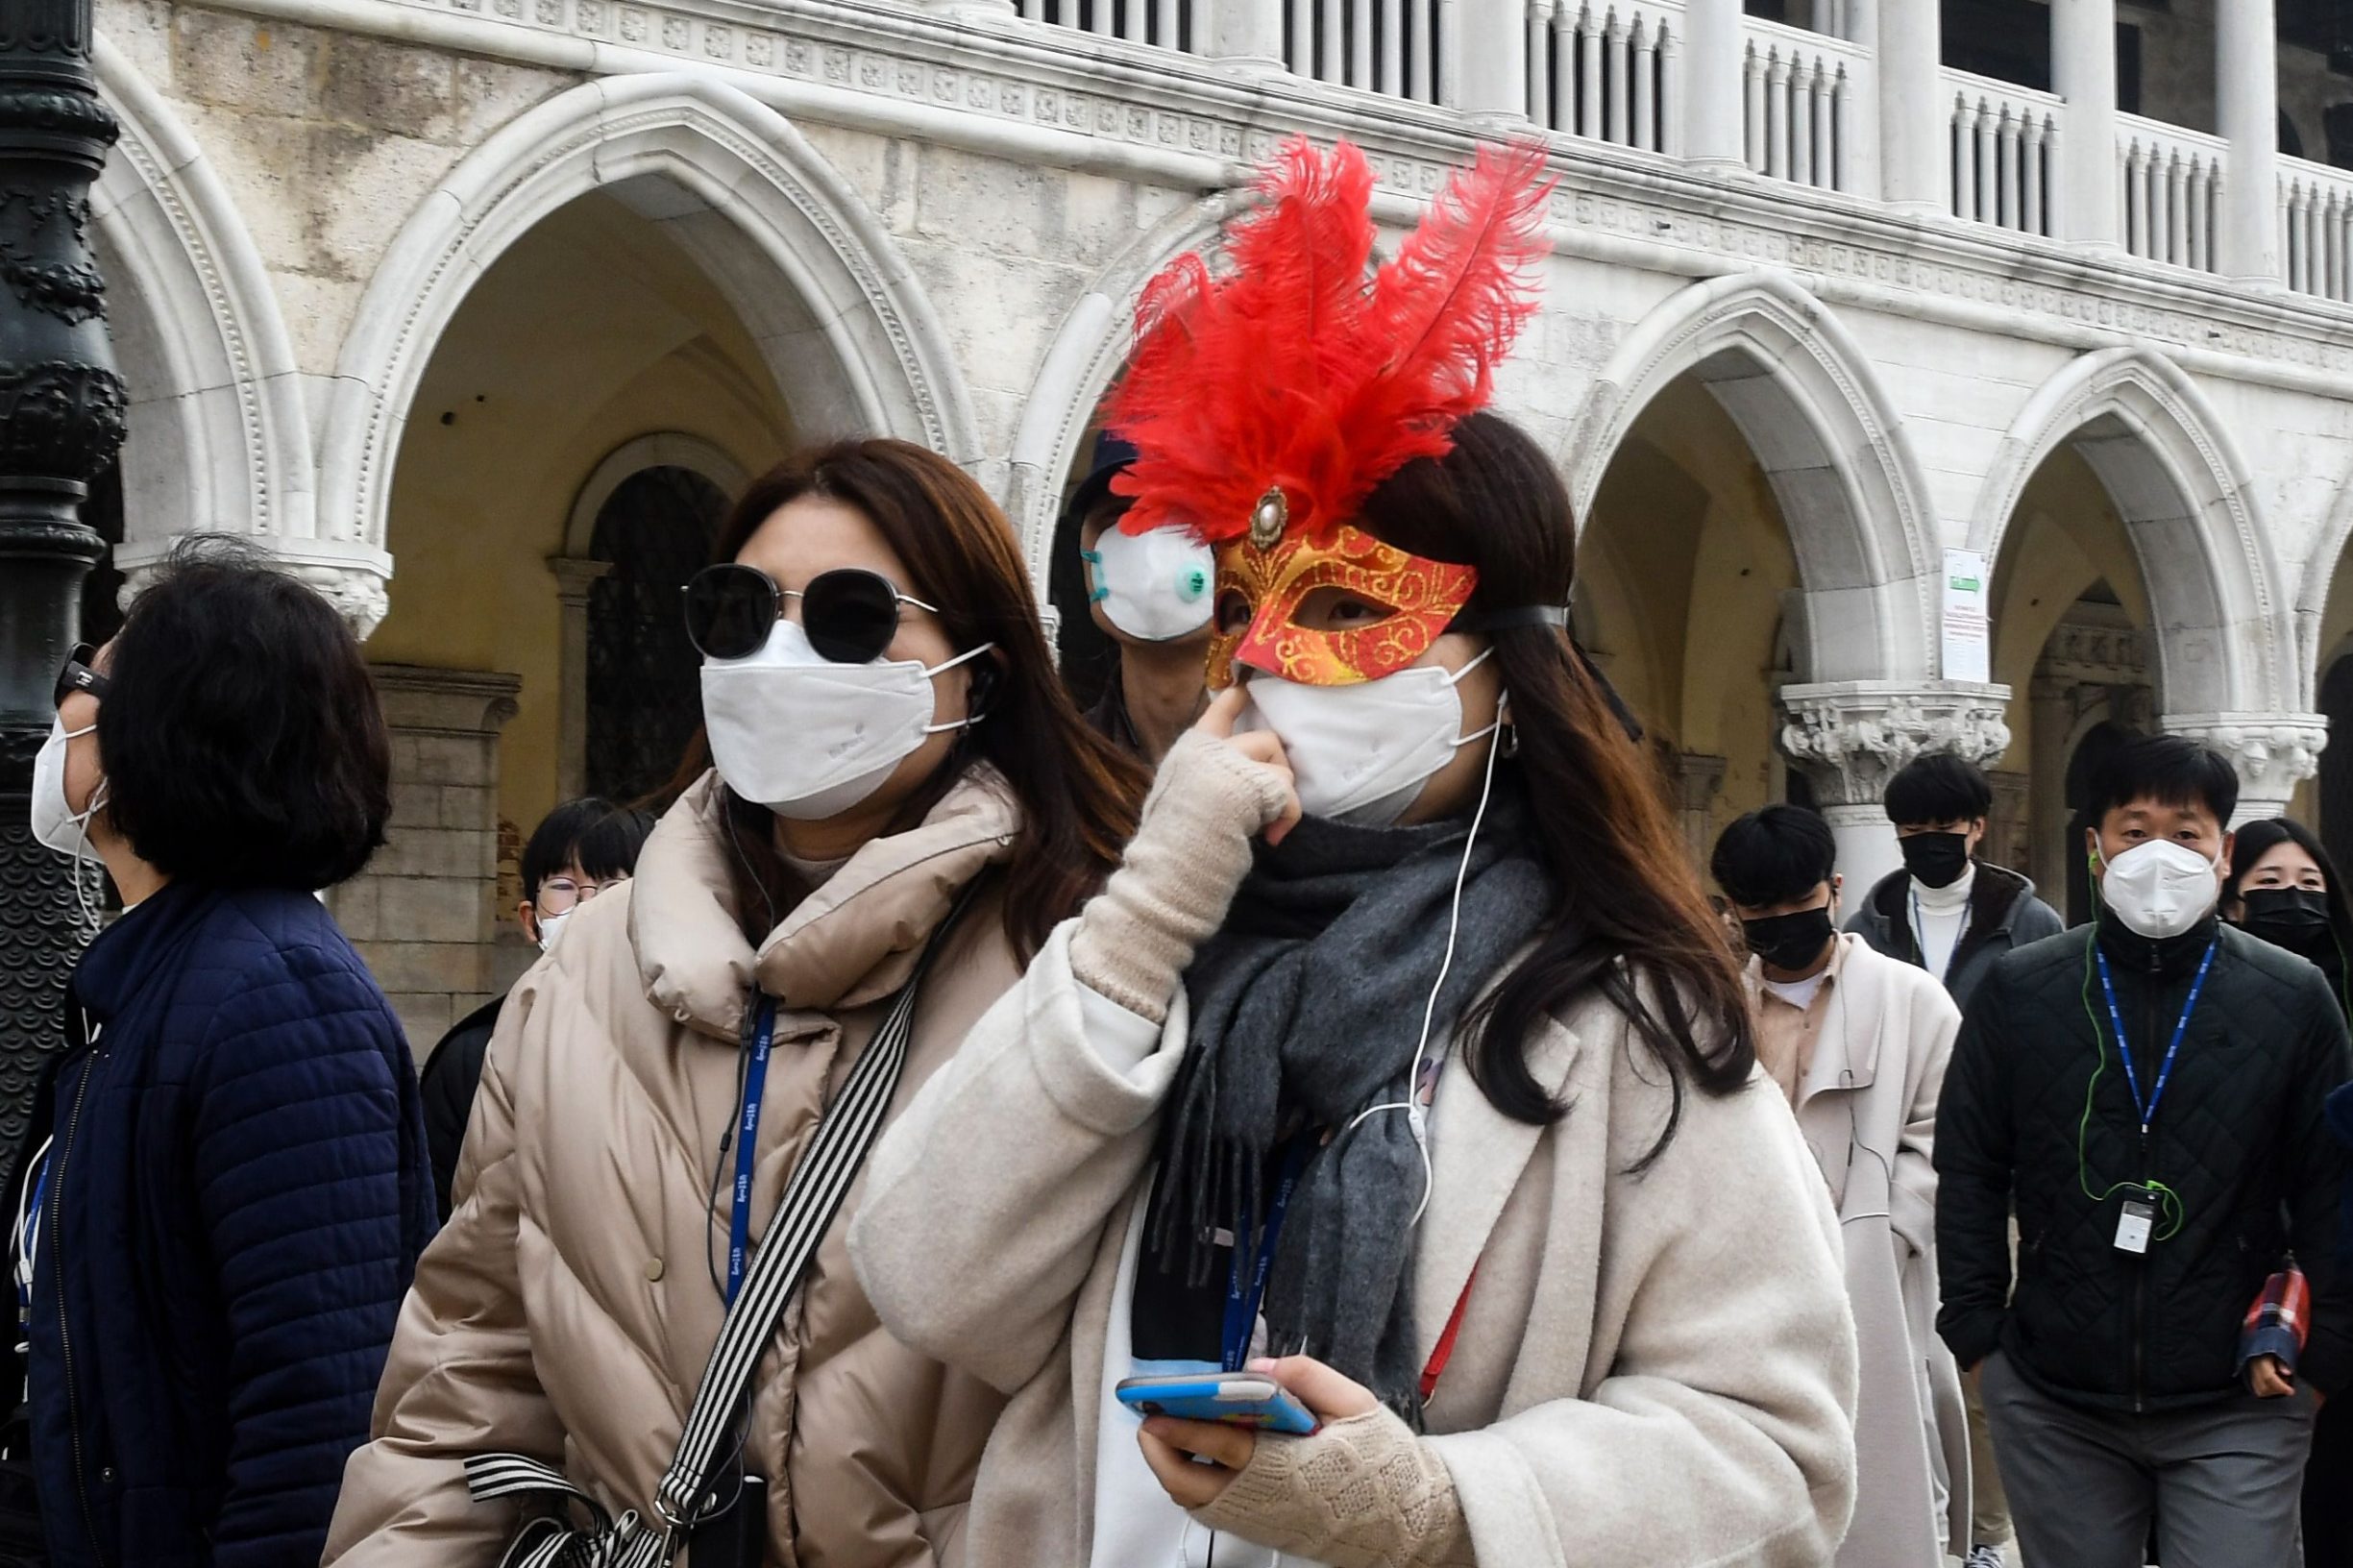 Tourists wearing protective facemasks and a Carnival mask visit the Piazza San Marco, in Venice, on February 24, 2020 during the usual period of the Carnival festivities which the last two days have been cancelled due to an outbreak of the COVID-19 the novel coronavirus, in northern Italy. - Italy reported on February 24, 2020 its fourth death from the new coronavirus, an 84-year old man in the northern Lombardy region, as the number of people contracting the virus continued to mount. (Photo by ANDREA PATTARO / AFP)